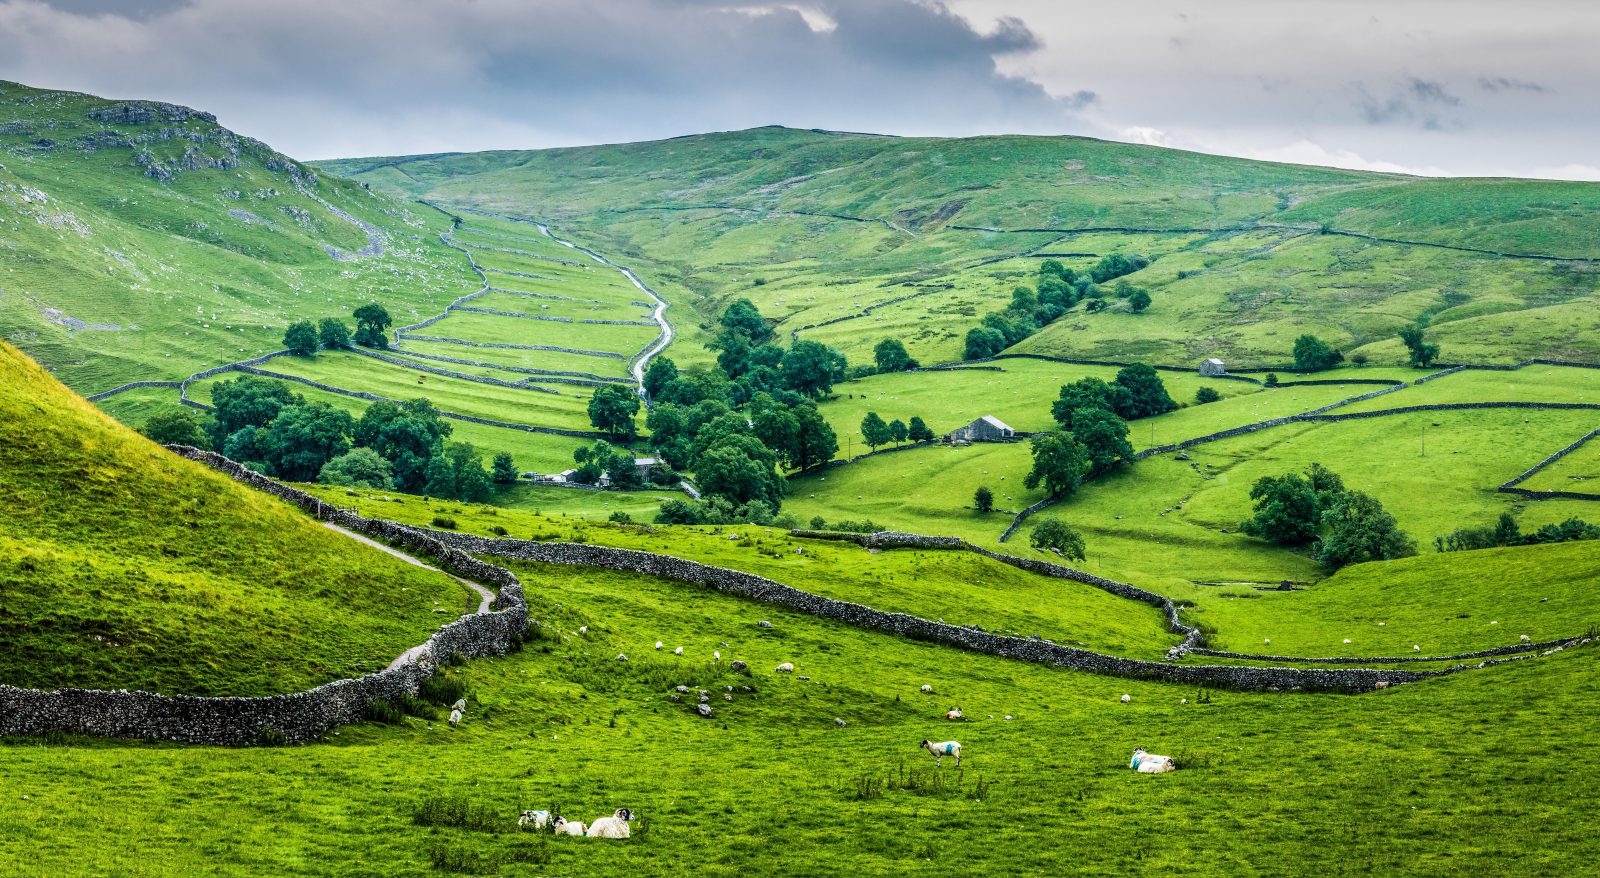 yorkshire scenery of green valley with stone fences and sheep in fields